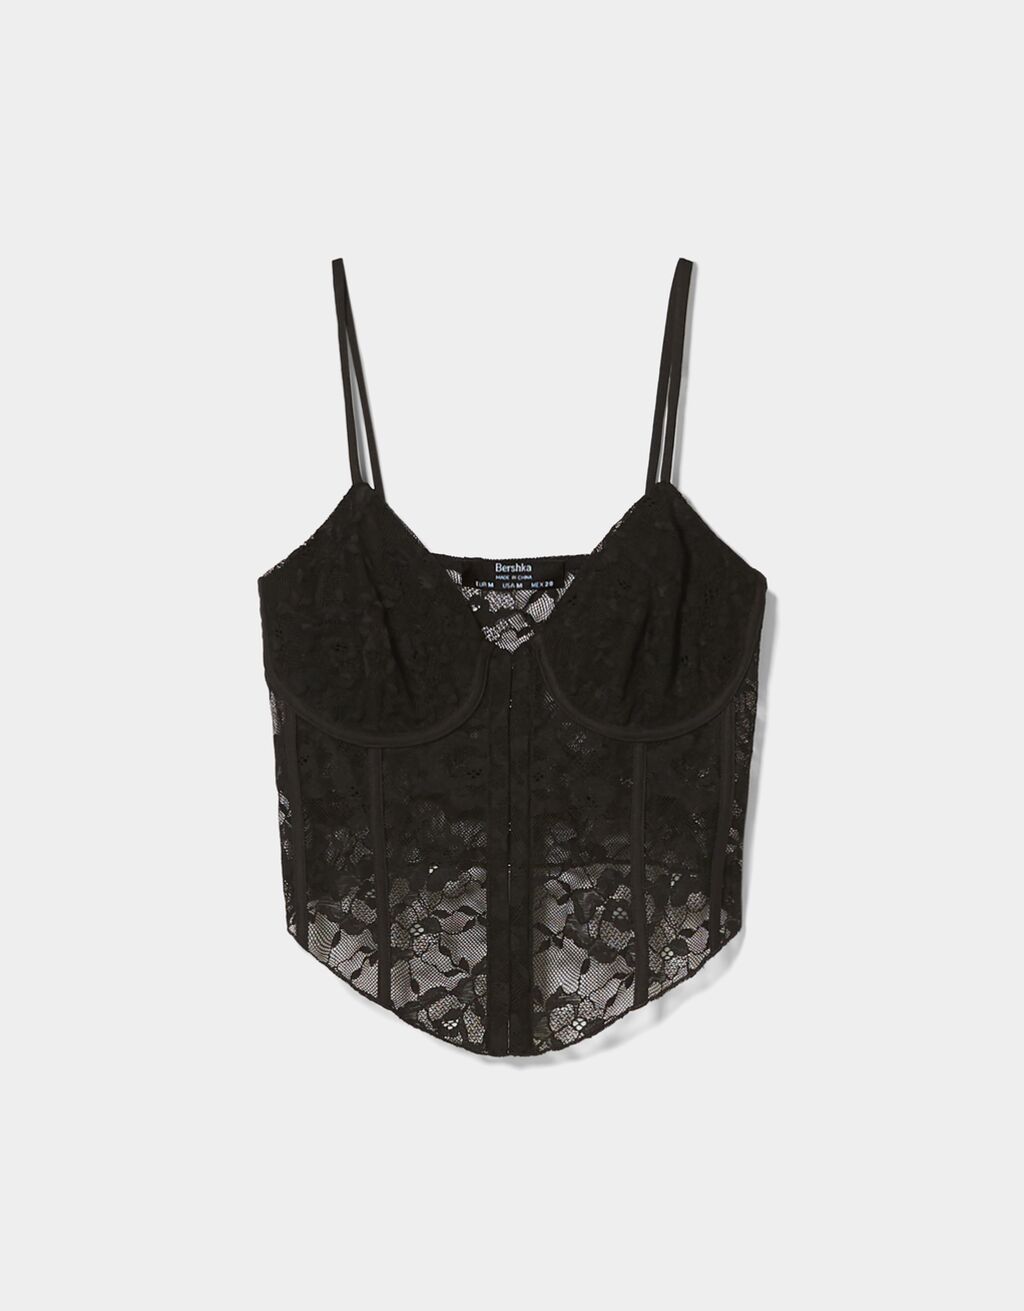 Blonde lace strappy corset top